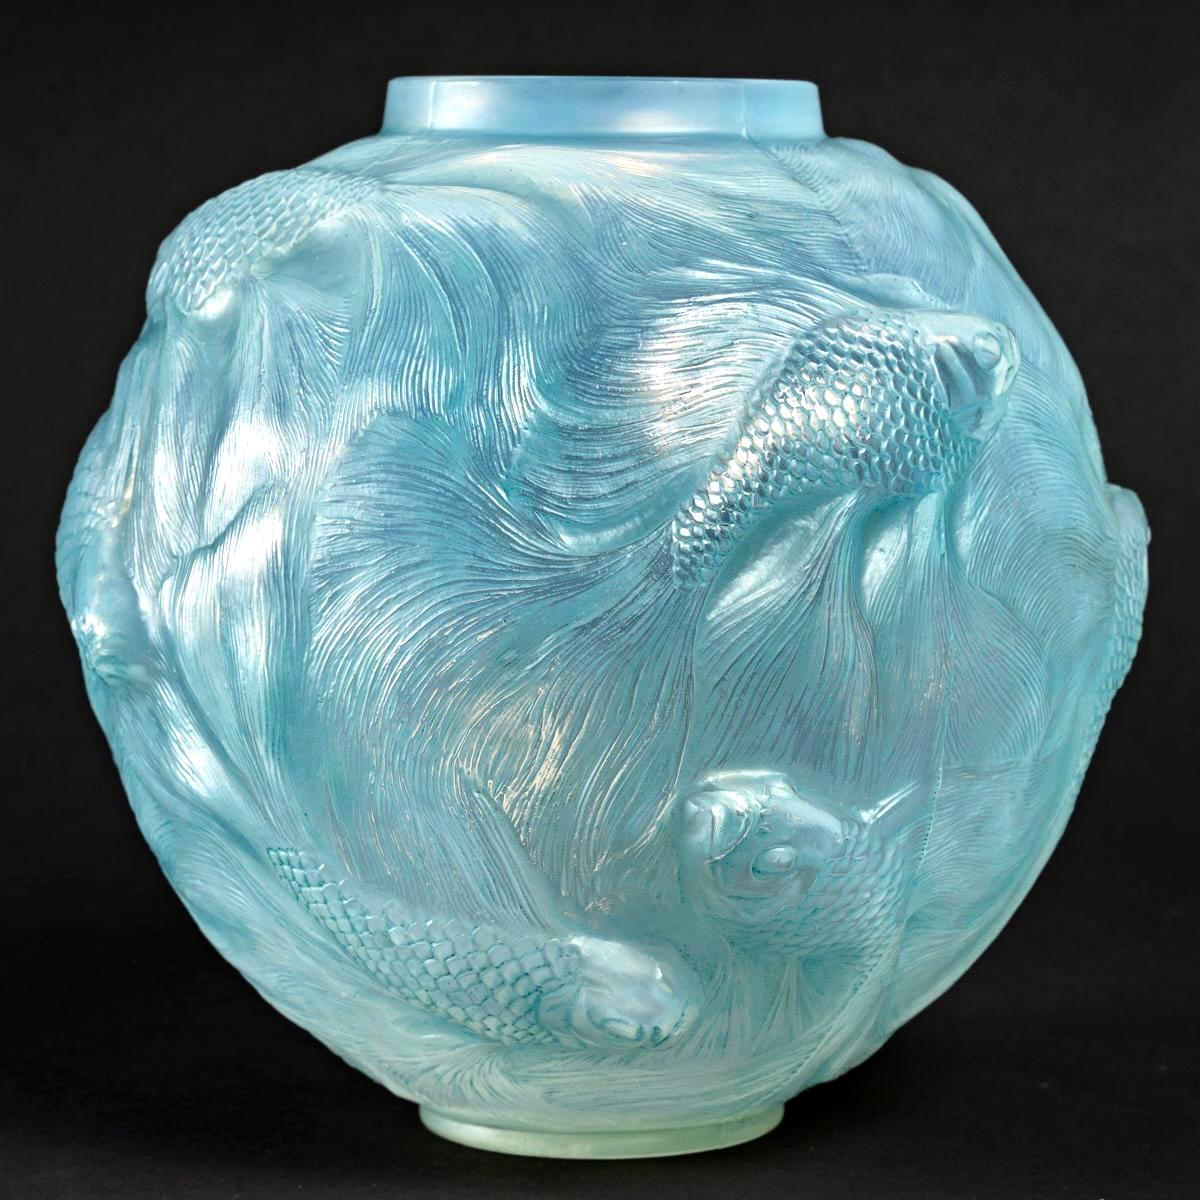 Molded 1924 Rene Lalique Formose Vase in Double Cased Opalescent Glass with Blue Stain